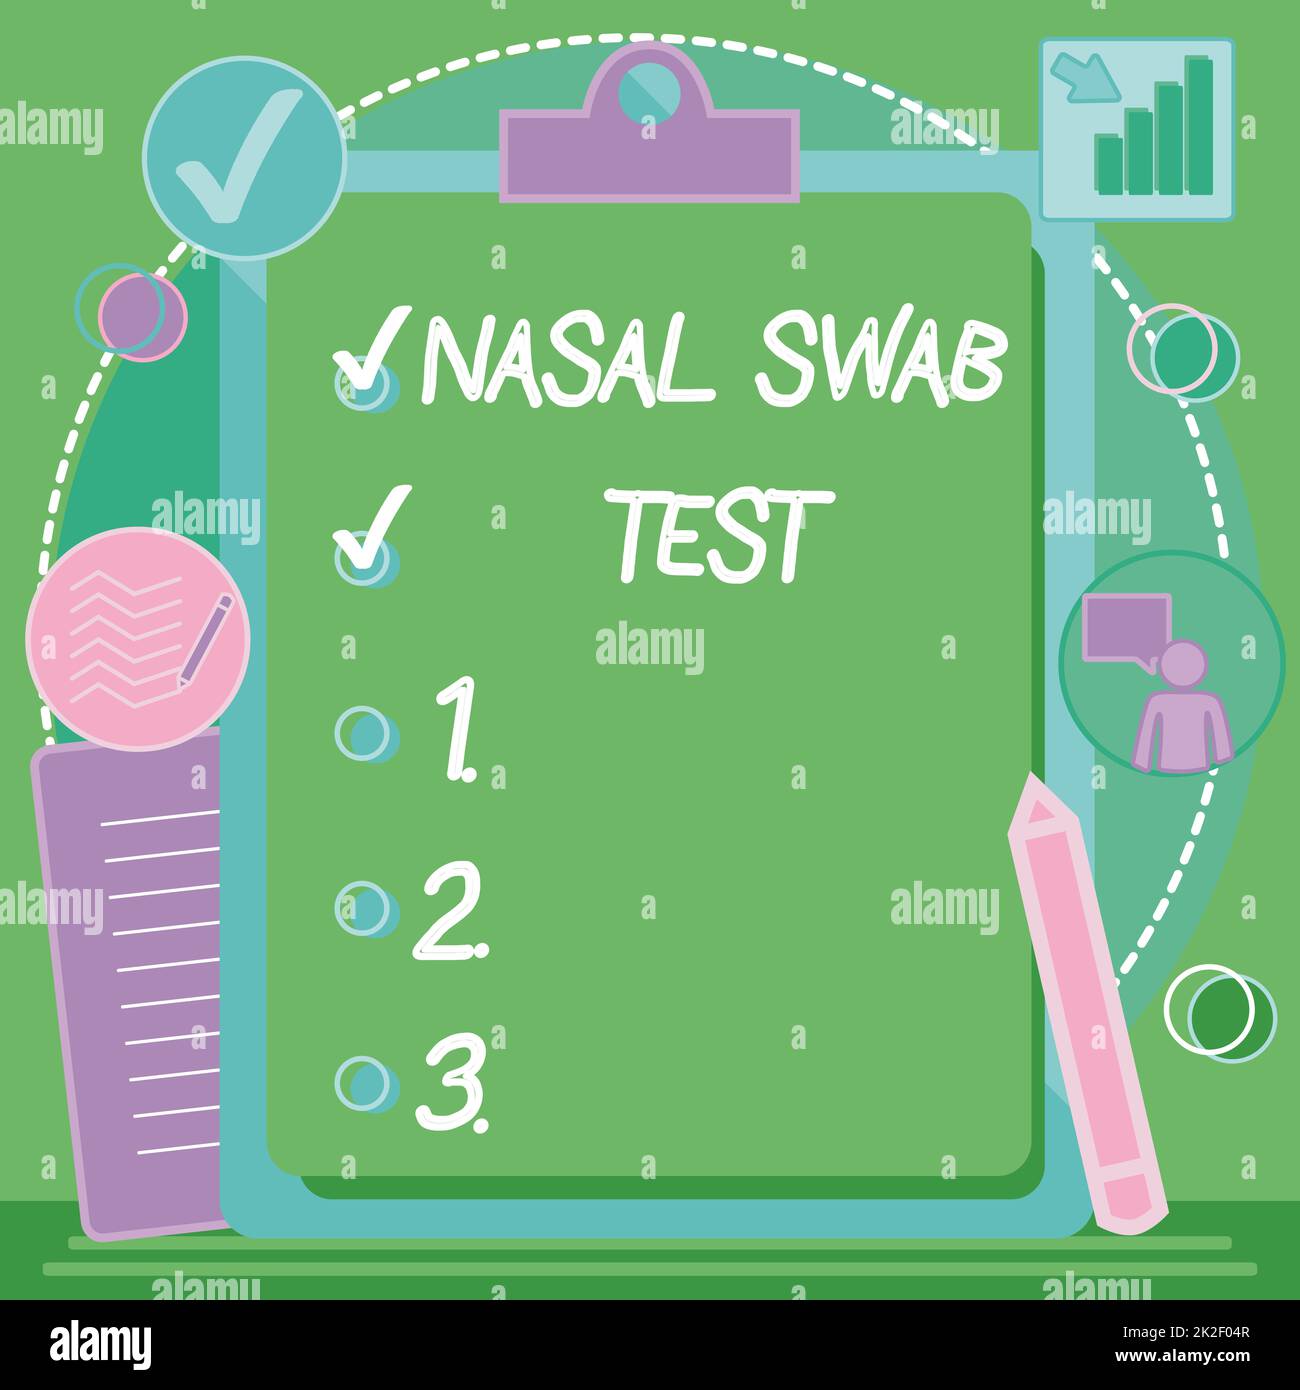 Sign displaying Nasal Swab Test. Internet Concept diagnosing an upper respiratory tract infection through nasal secretion Clipboard Drawing With Checklist Marked Done Items On List. Stock Photo